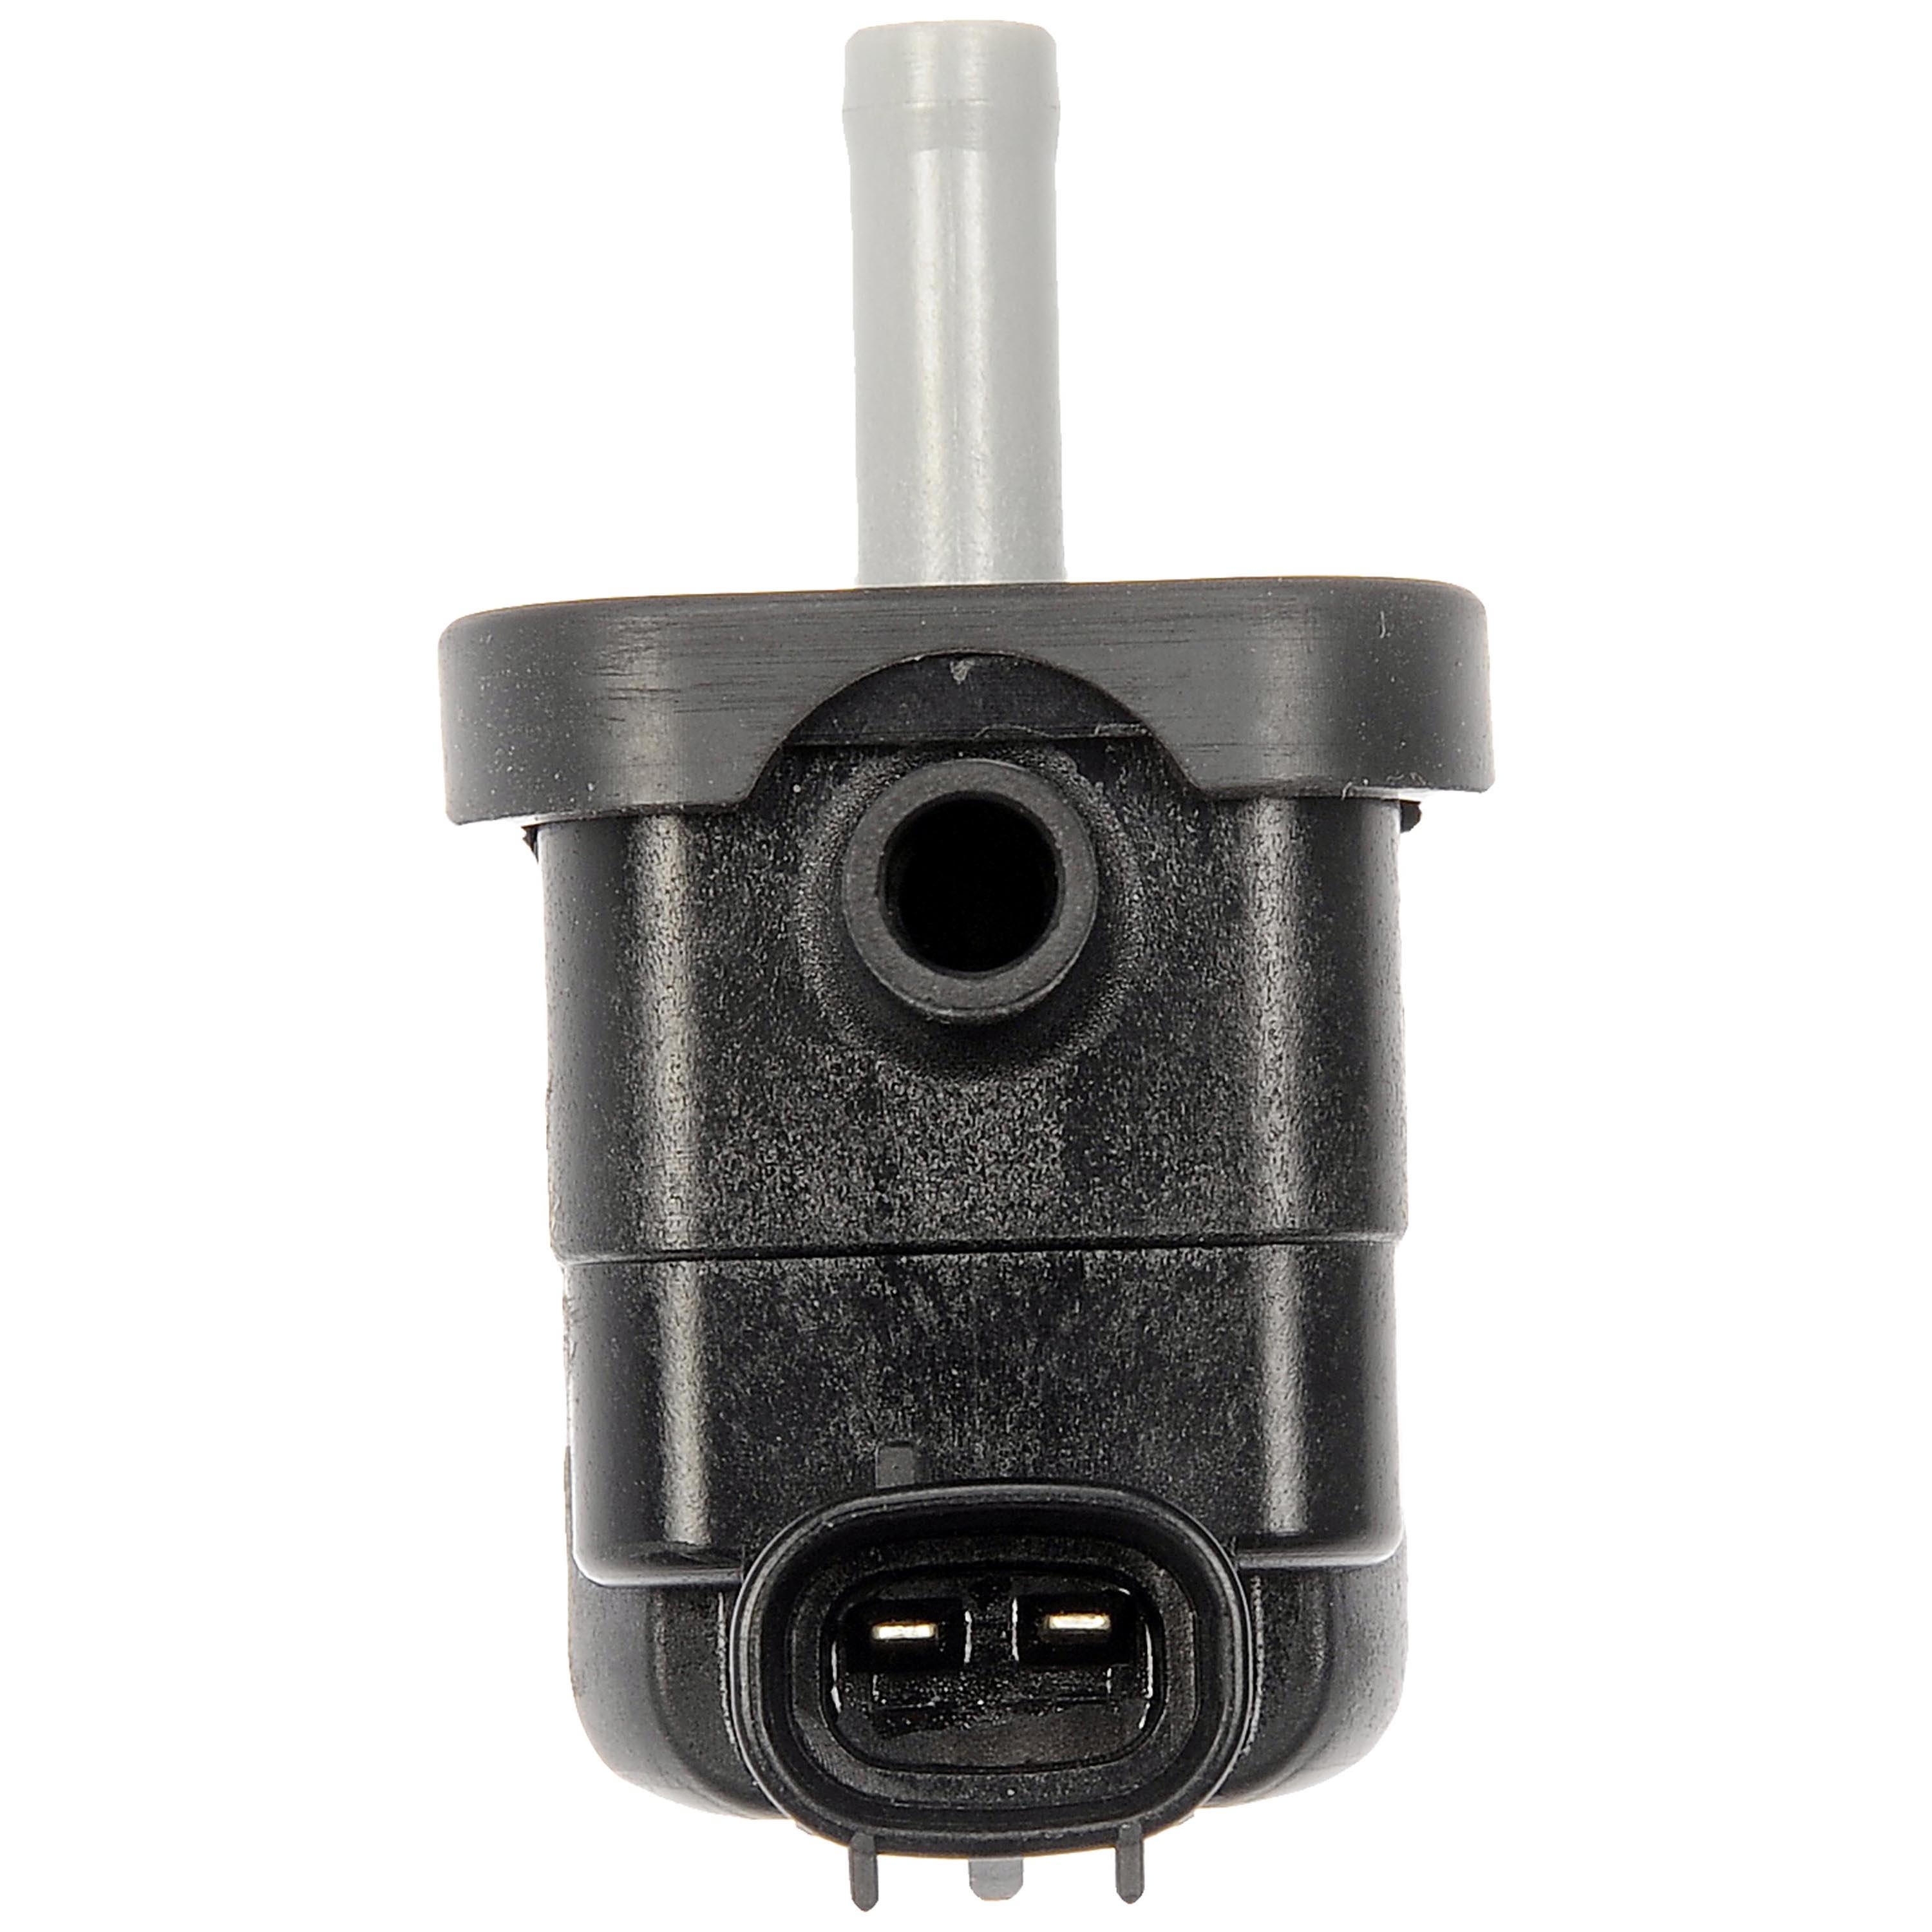 Dorman 911-394 Vapor Canister Purge Valve for Specific Toyota Models Fits  2010 Toyota Corolla